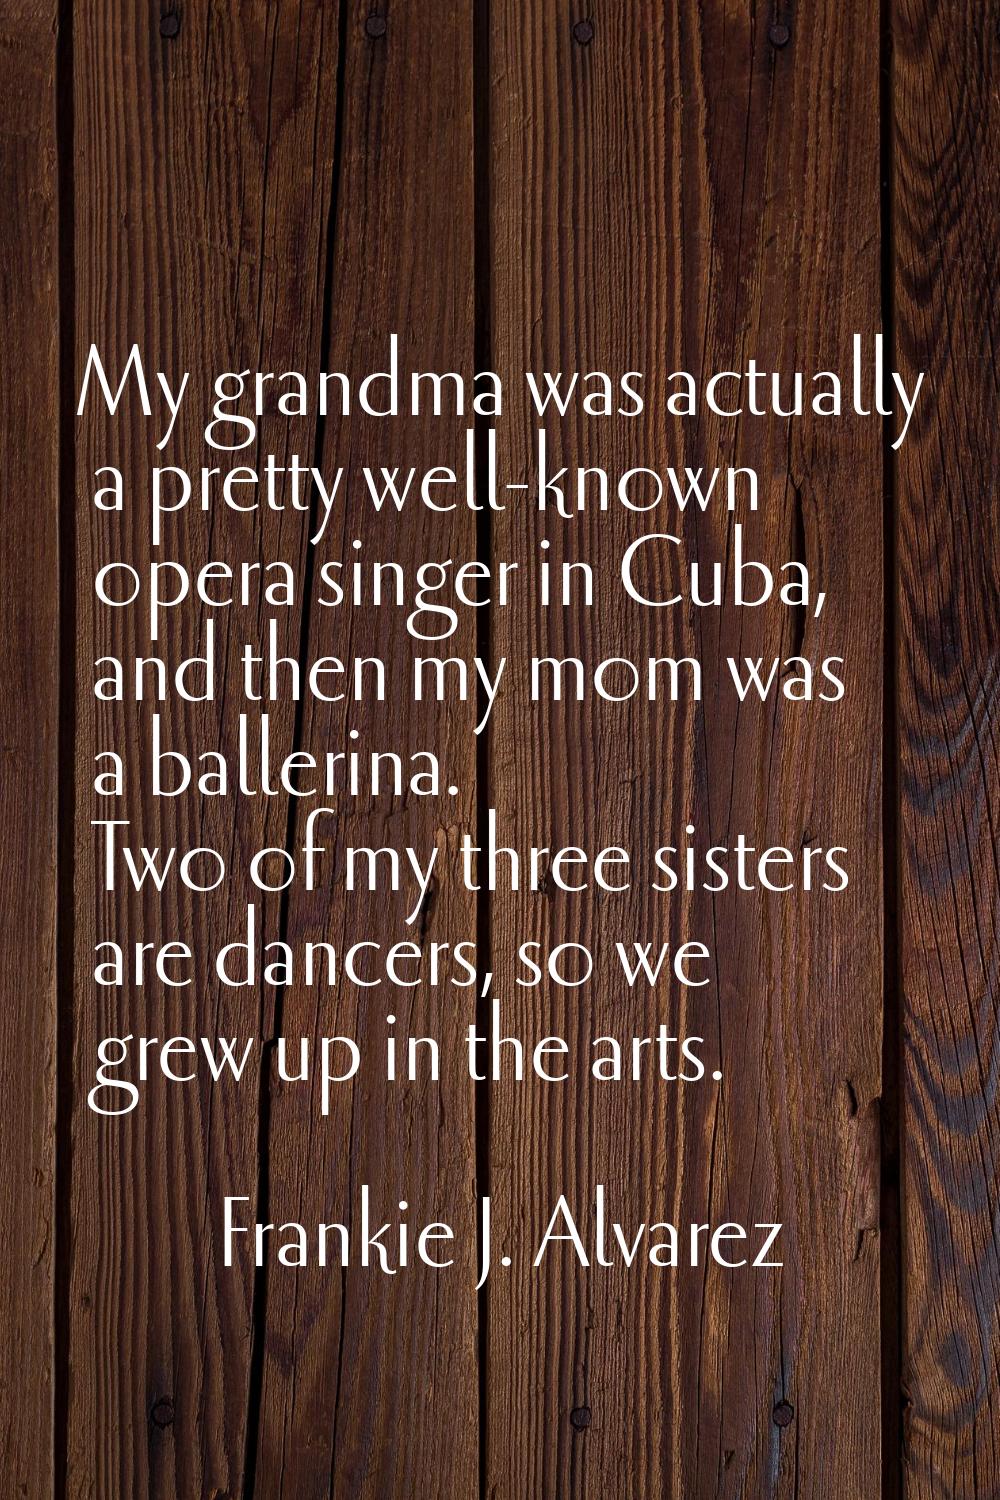 My grandma was actually a pretty well-known opera singer in Cuba, and then my mom was a ballerina. 